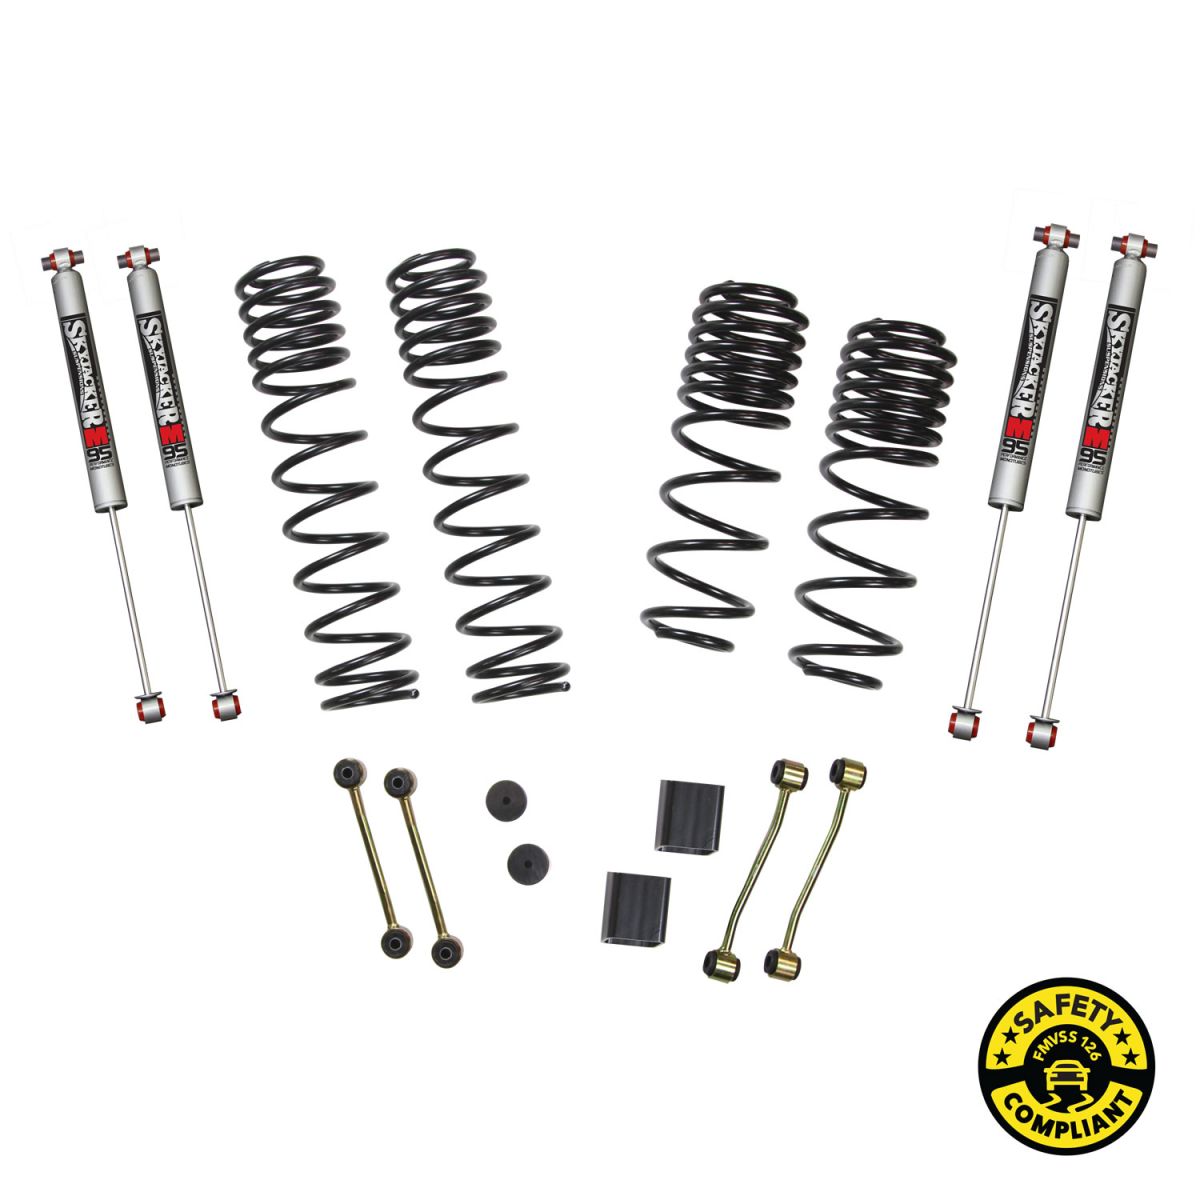 Skyjacker Suspension - Skyjacker Dual Rate Long Travel 2-2.5" Lift Kit System with M95 Shocks For 18-20 Jeep Wrangler JL Unlimited Four Door